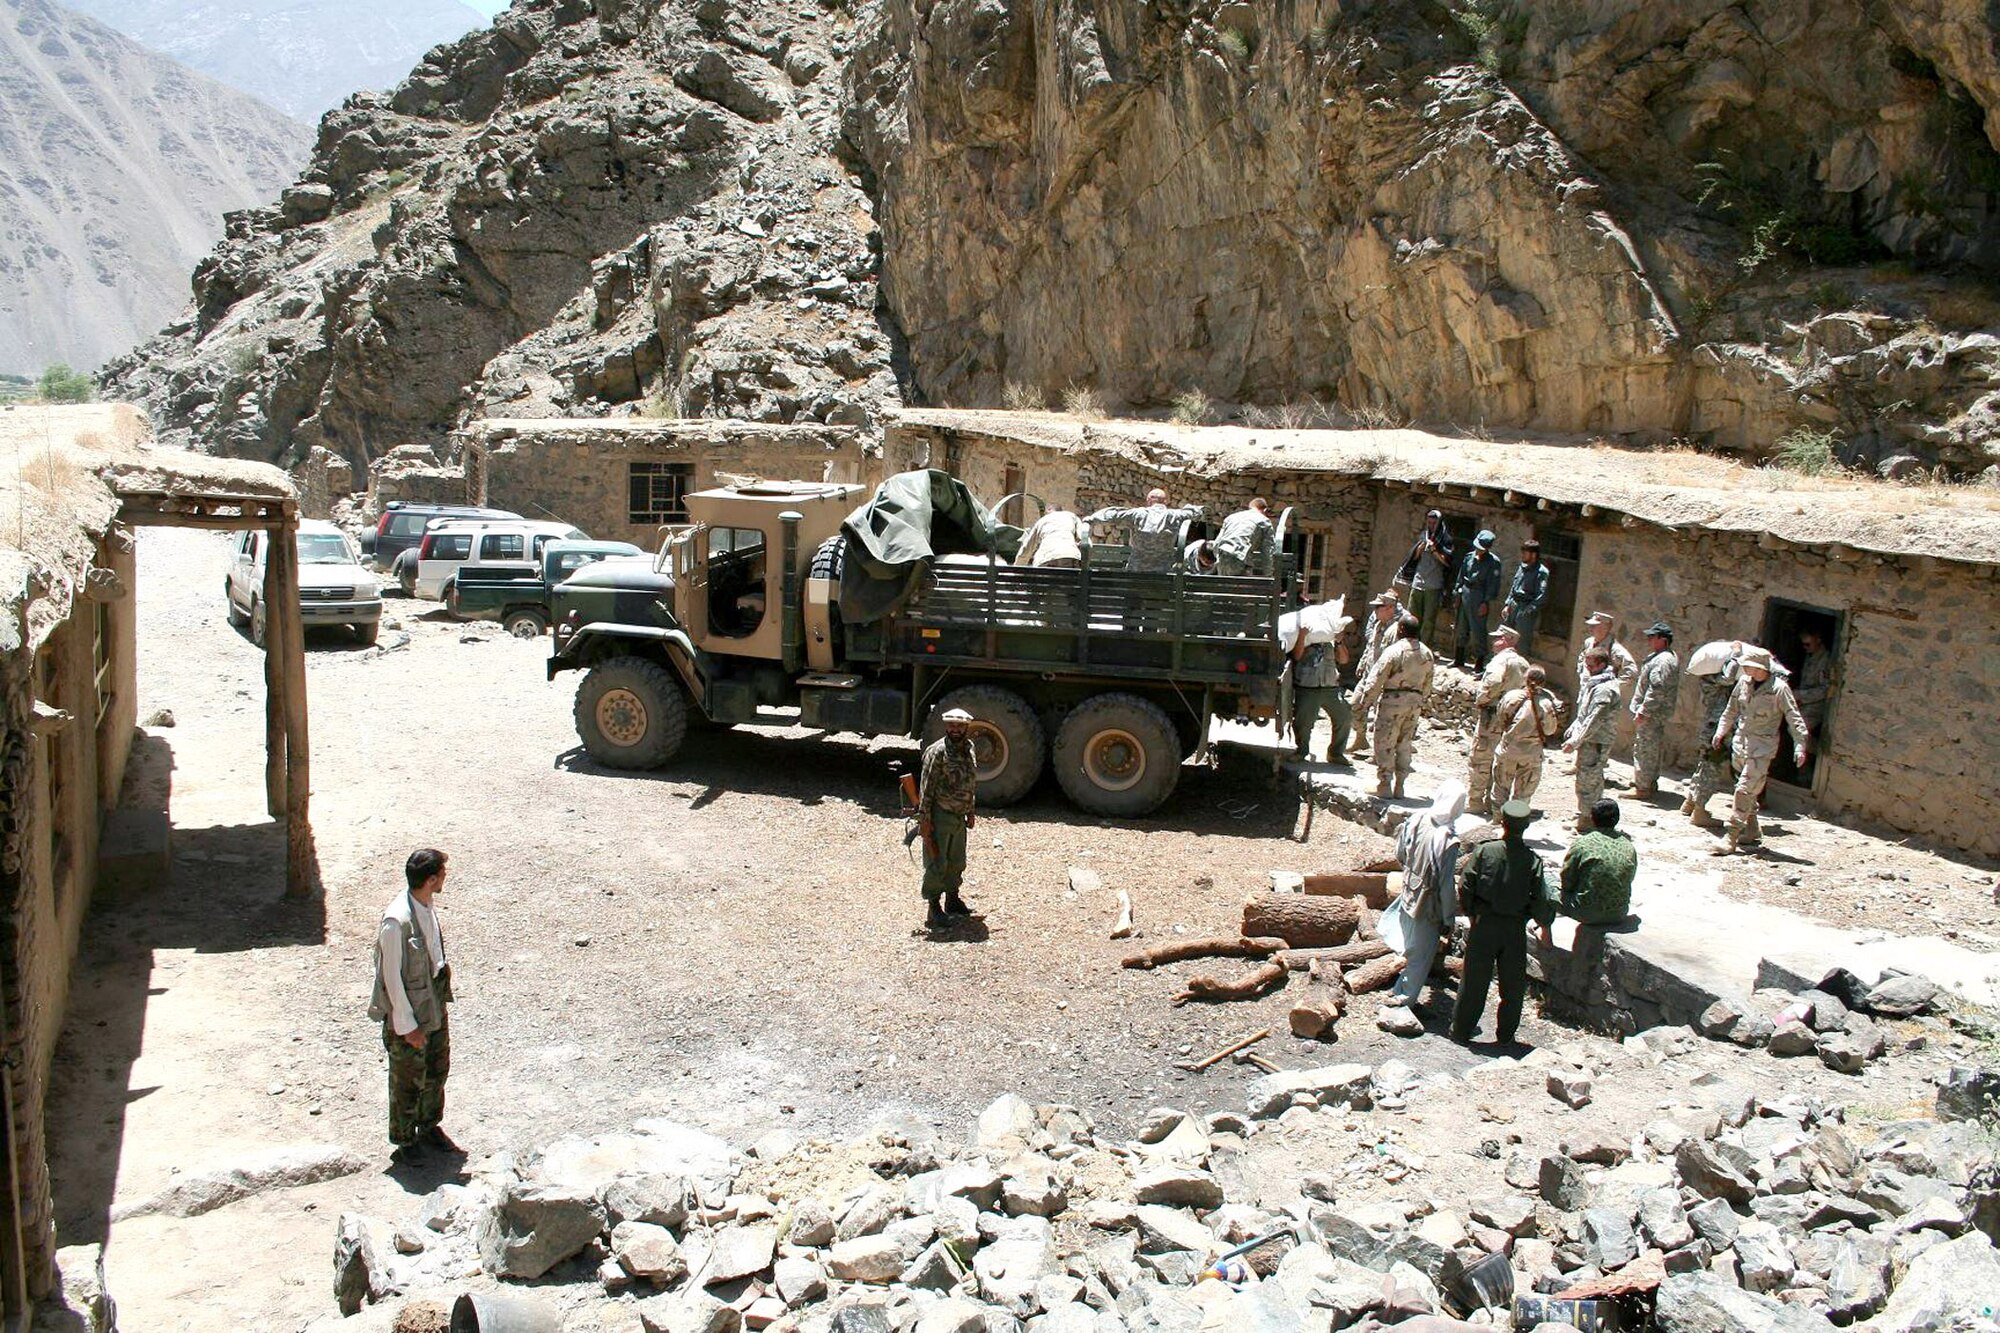 Members of the Panjshir Provincial Reconstruction Team and the Army's 405th Civil Affairs Battalion unload humanitarian assistance supplies at the Afghanistan National Police Station in the Parandae District on Saturday, July 8. The team delivered more than three tons of food to 240 families, who are beginning to run out of food from last year's harvest. Elders from the Parandae District requested the assistance and coordinated with the PRT through the deputy governor and minister of women's affairs. (U.S. Air Force photo/Tech. Sgt. John Cumper)